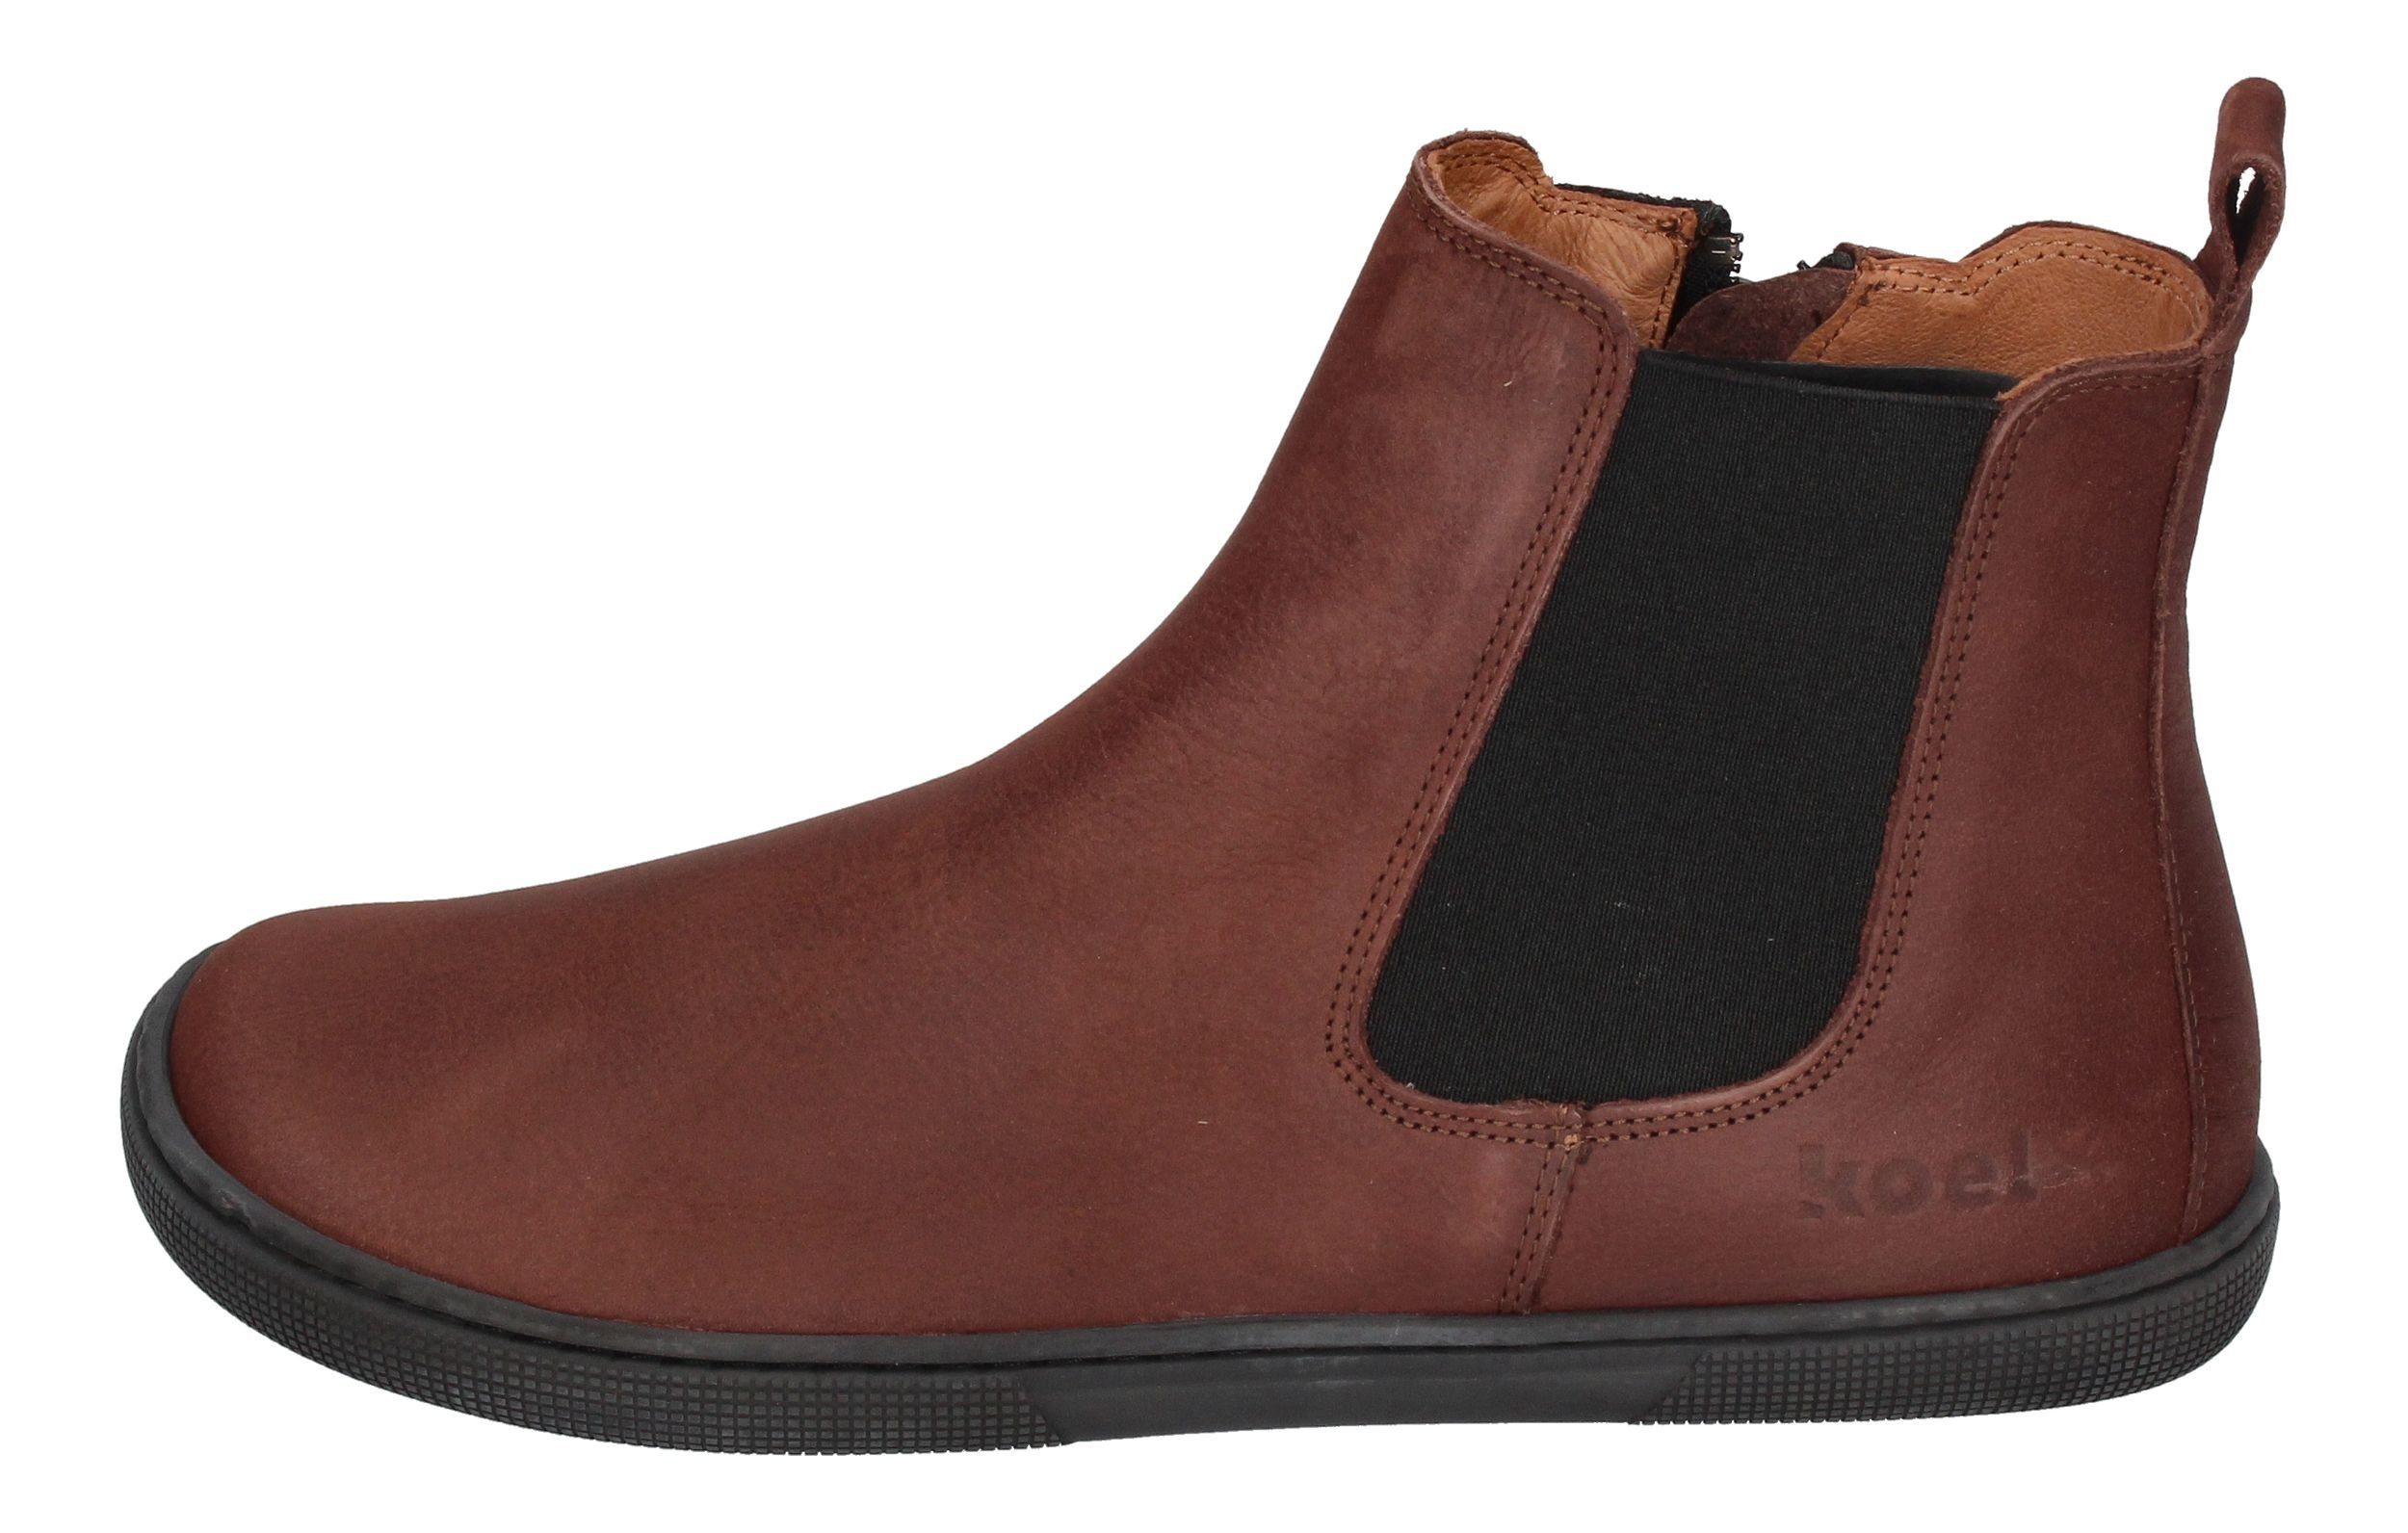 KOEL Chocolate Chelseaboots Hydro 08L009.231-510 Filas